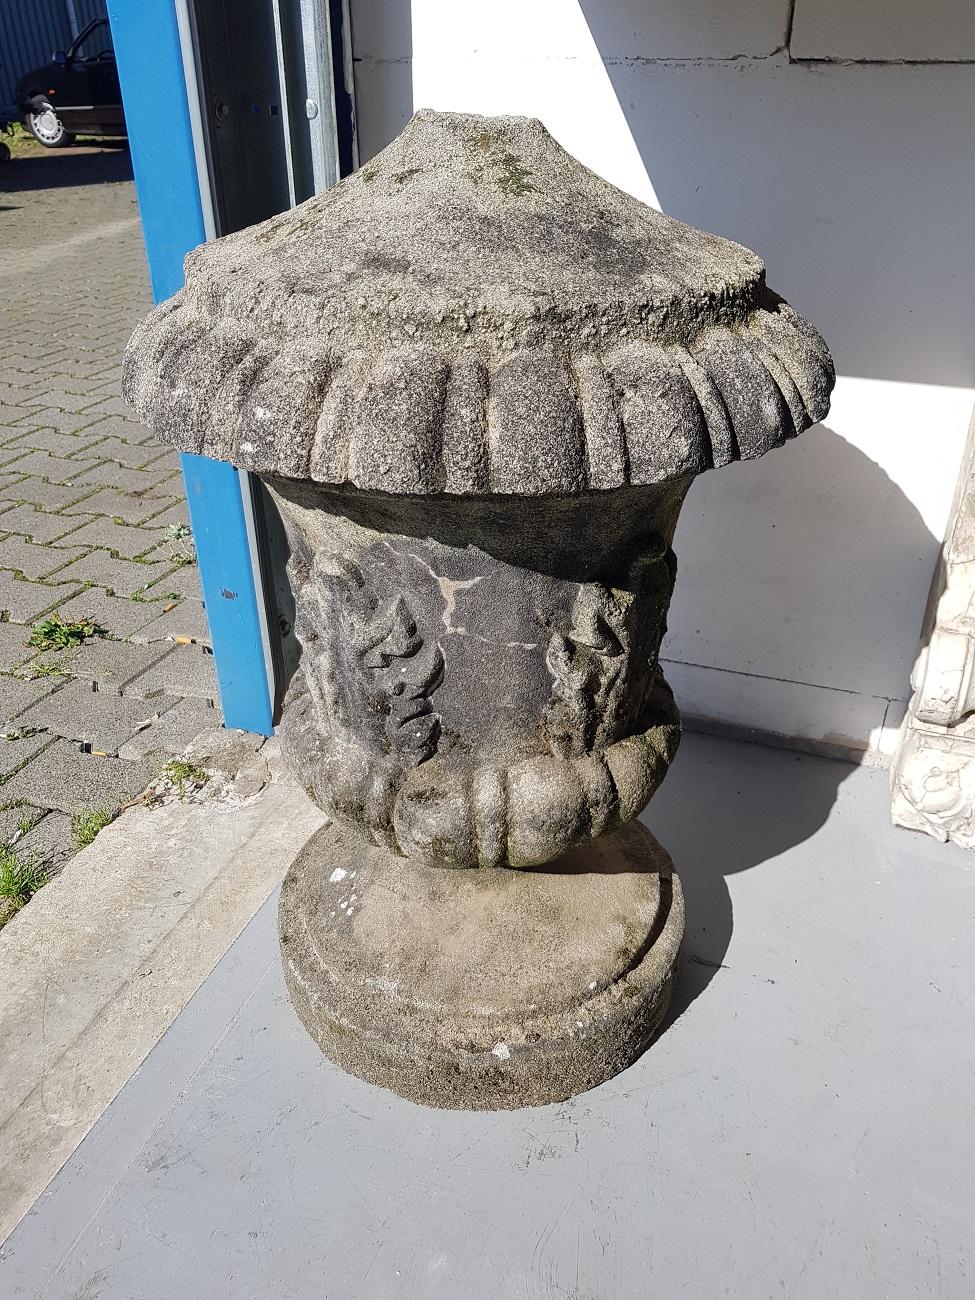 After a antique example a heavy old cast stone vase in the shape of an urn with acanthus leaves all around (top ornament missing), early 20th century.

The measurements are,
Depth 47 cm/ 18.5 inch.
Width 47 cm/ 18.5 inch.
Height 72 cm/ 28.3